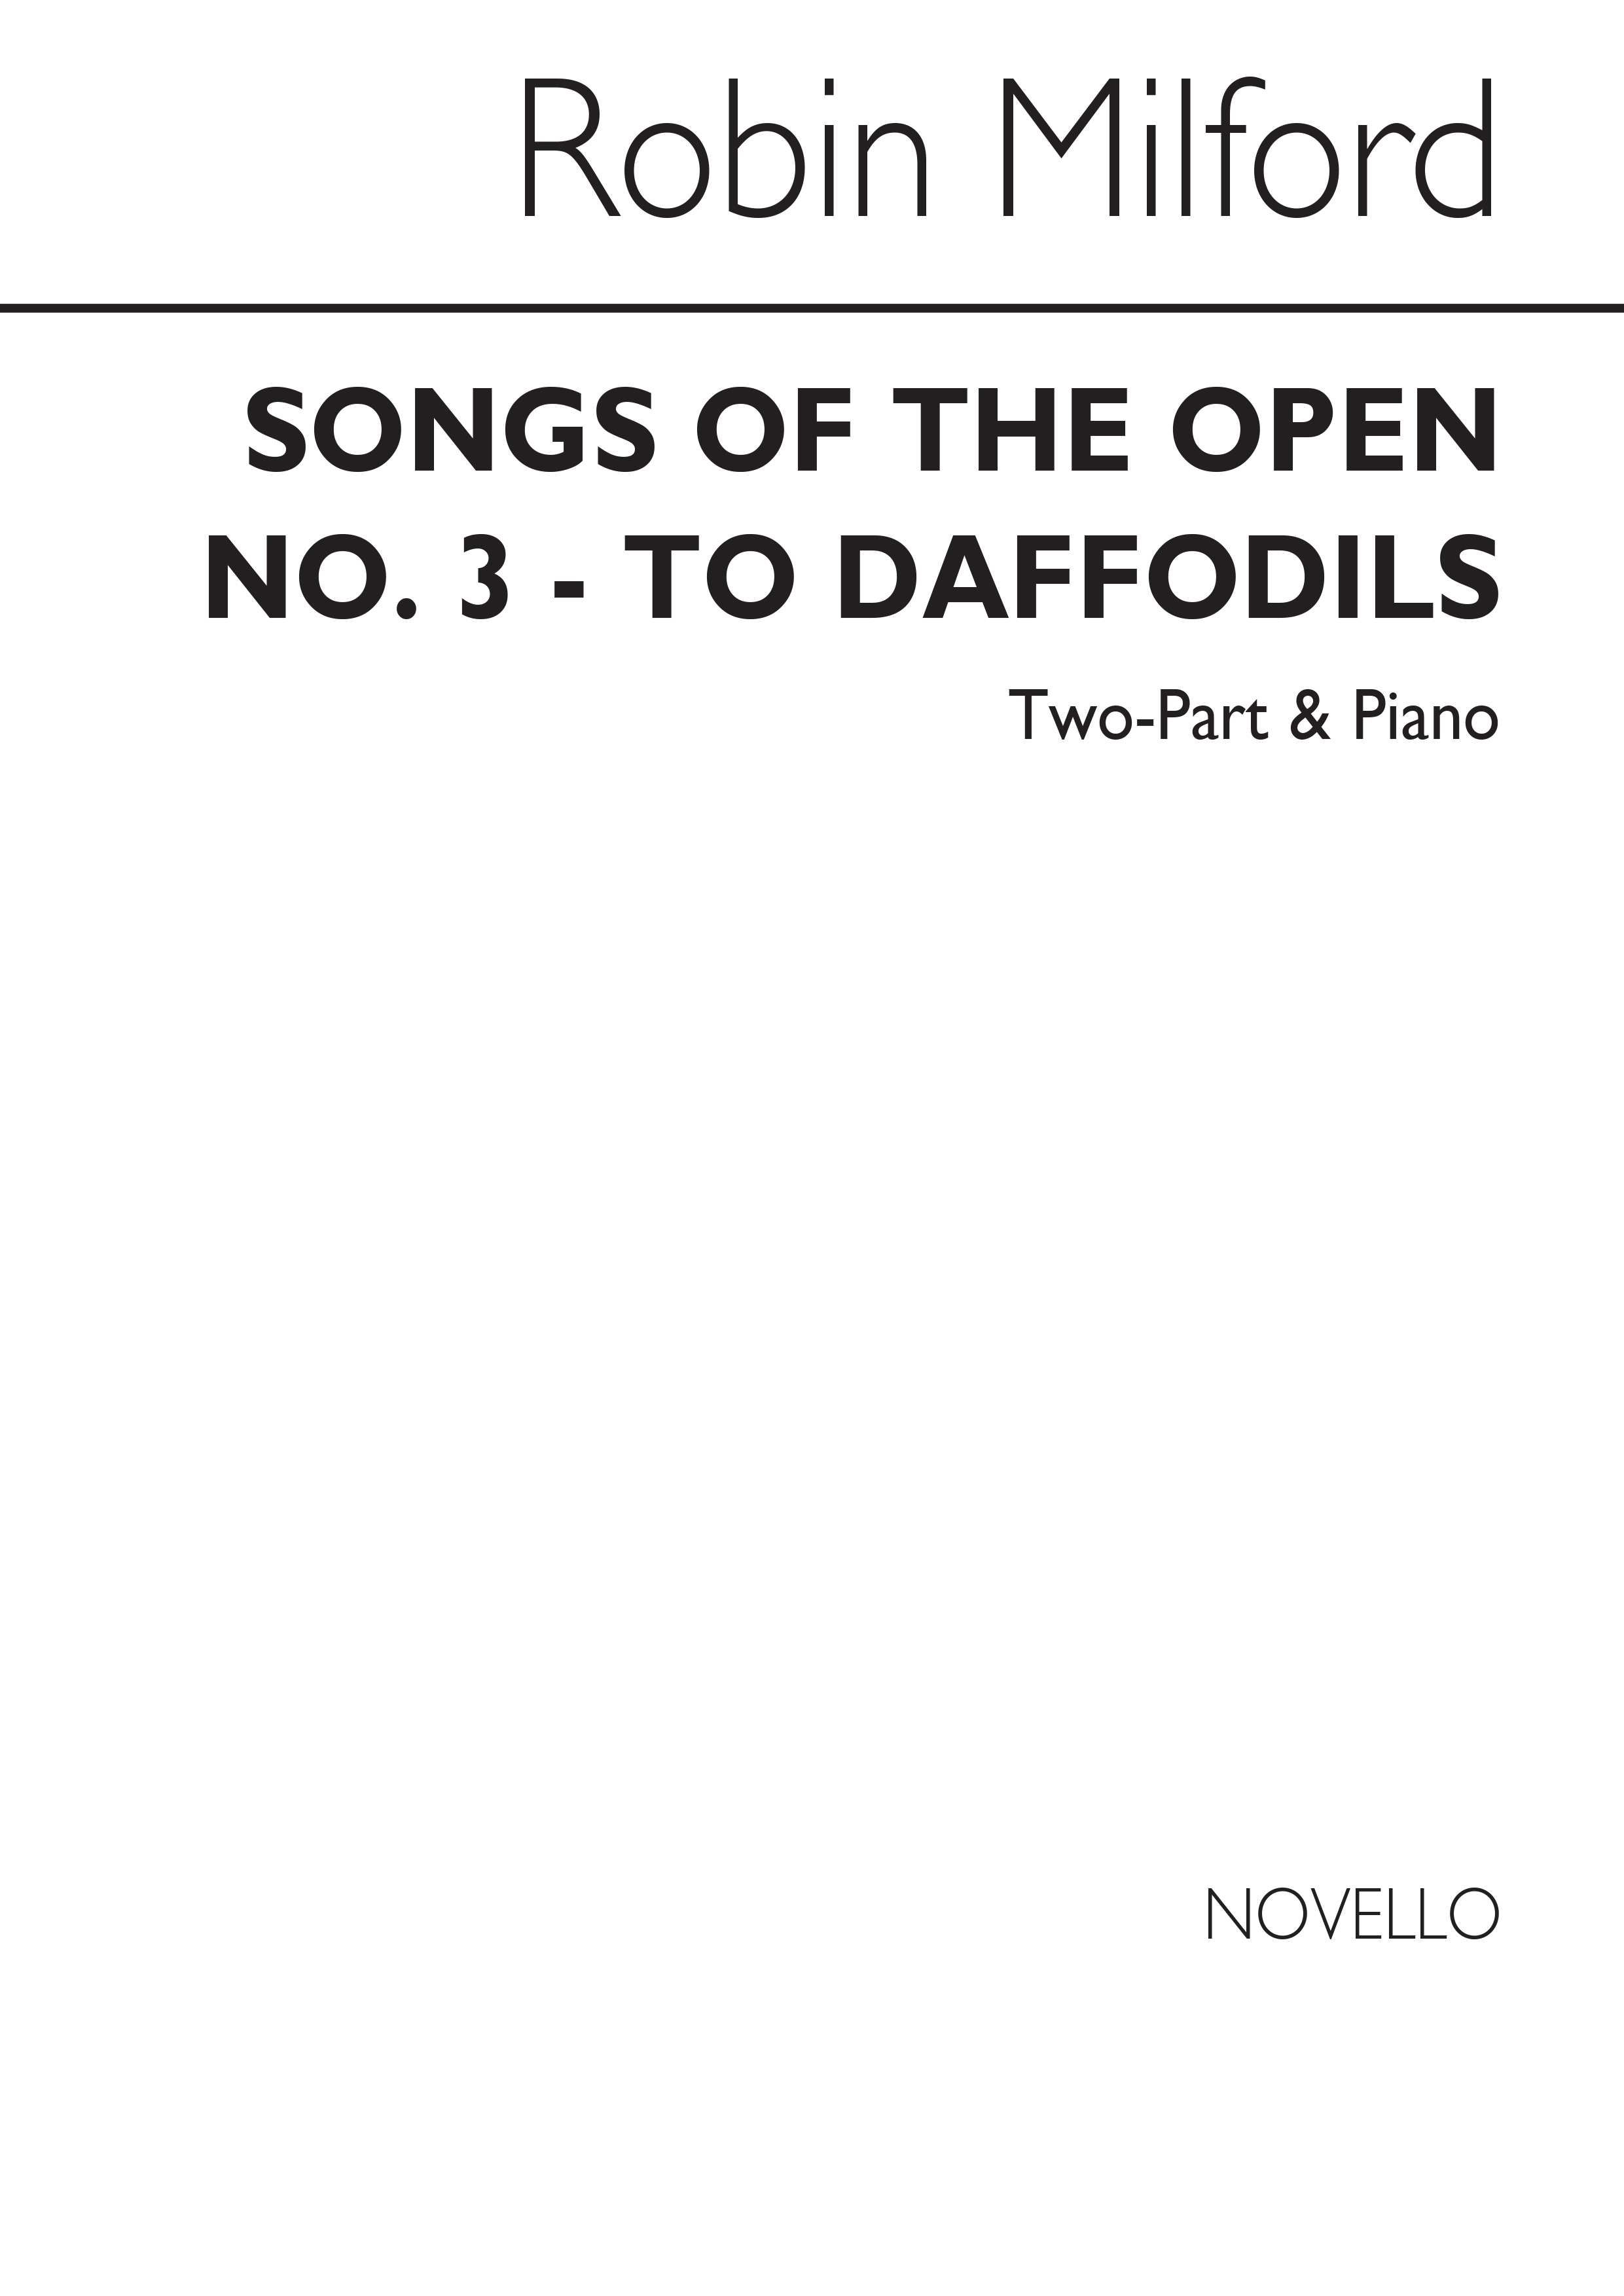 Robin Milford: To Daffodils Op45 No.3 2-part/Piano